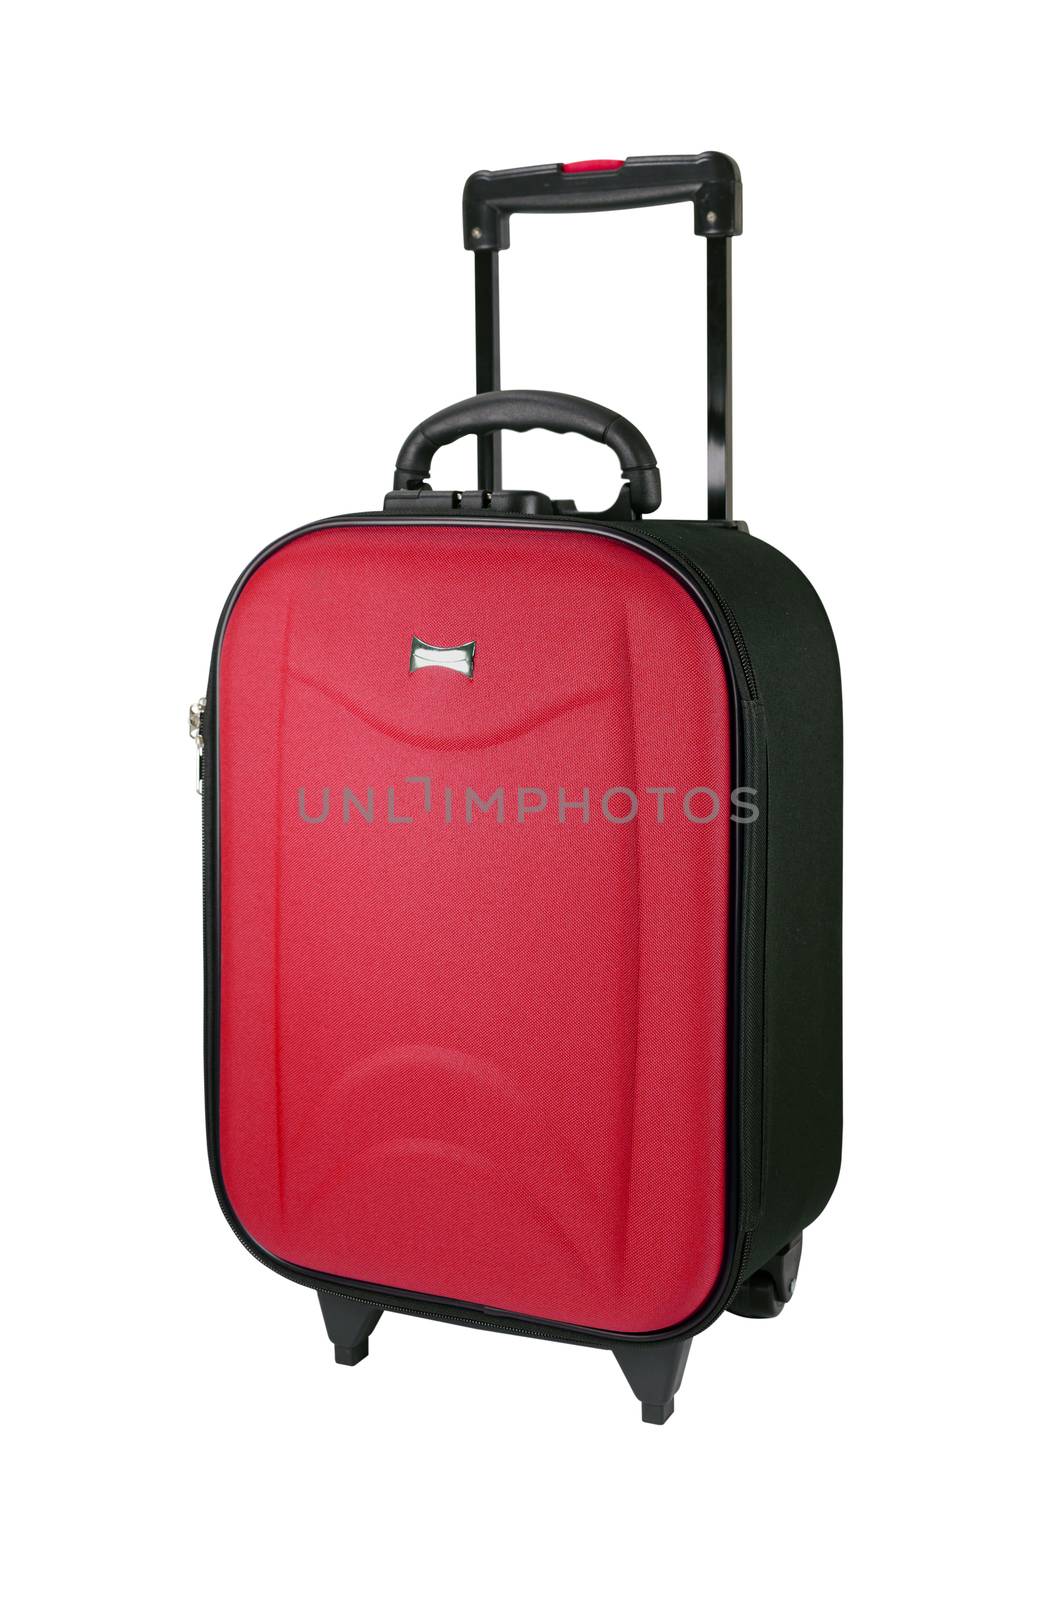 Red Travel luggage isolated on the white background. by nop16